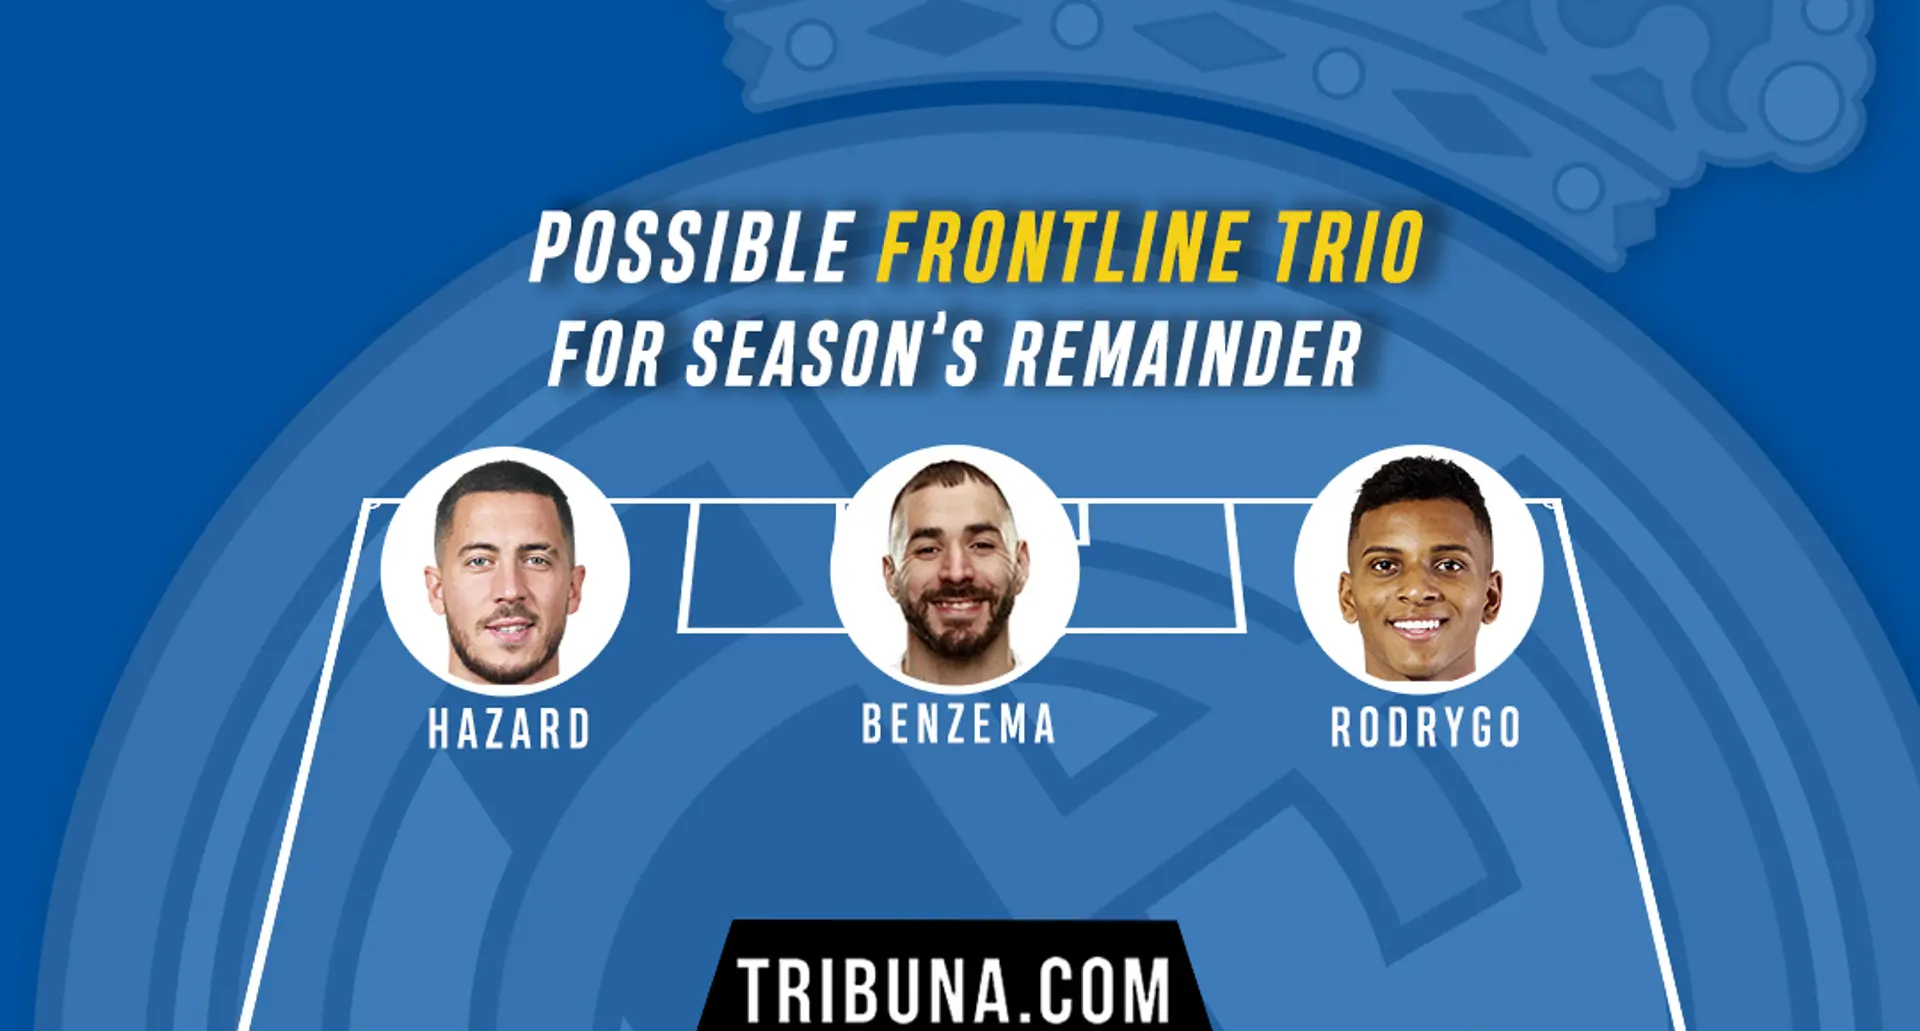 🤔 Is it the best frontline trio we could play with after the break?